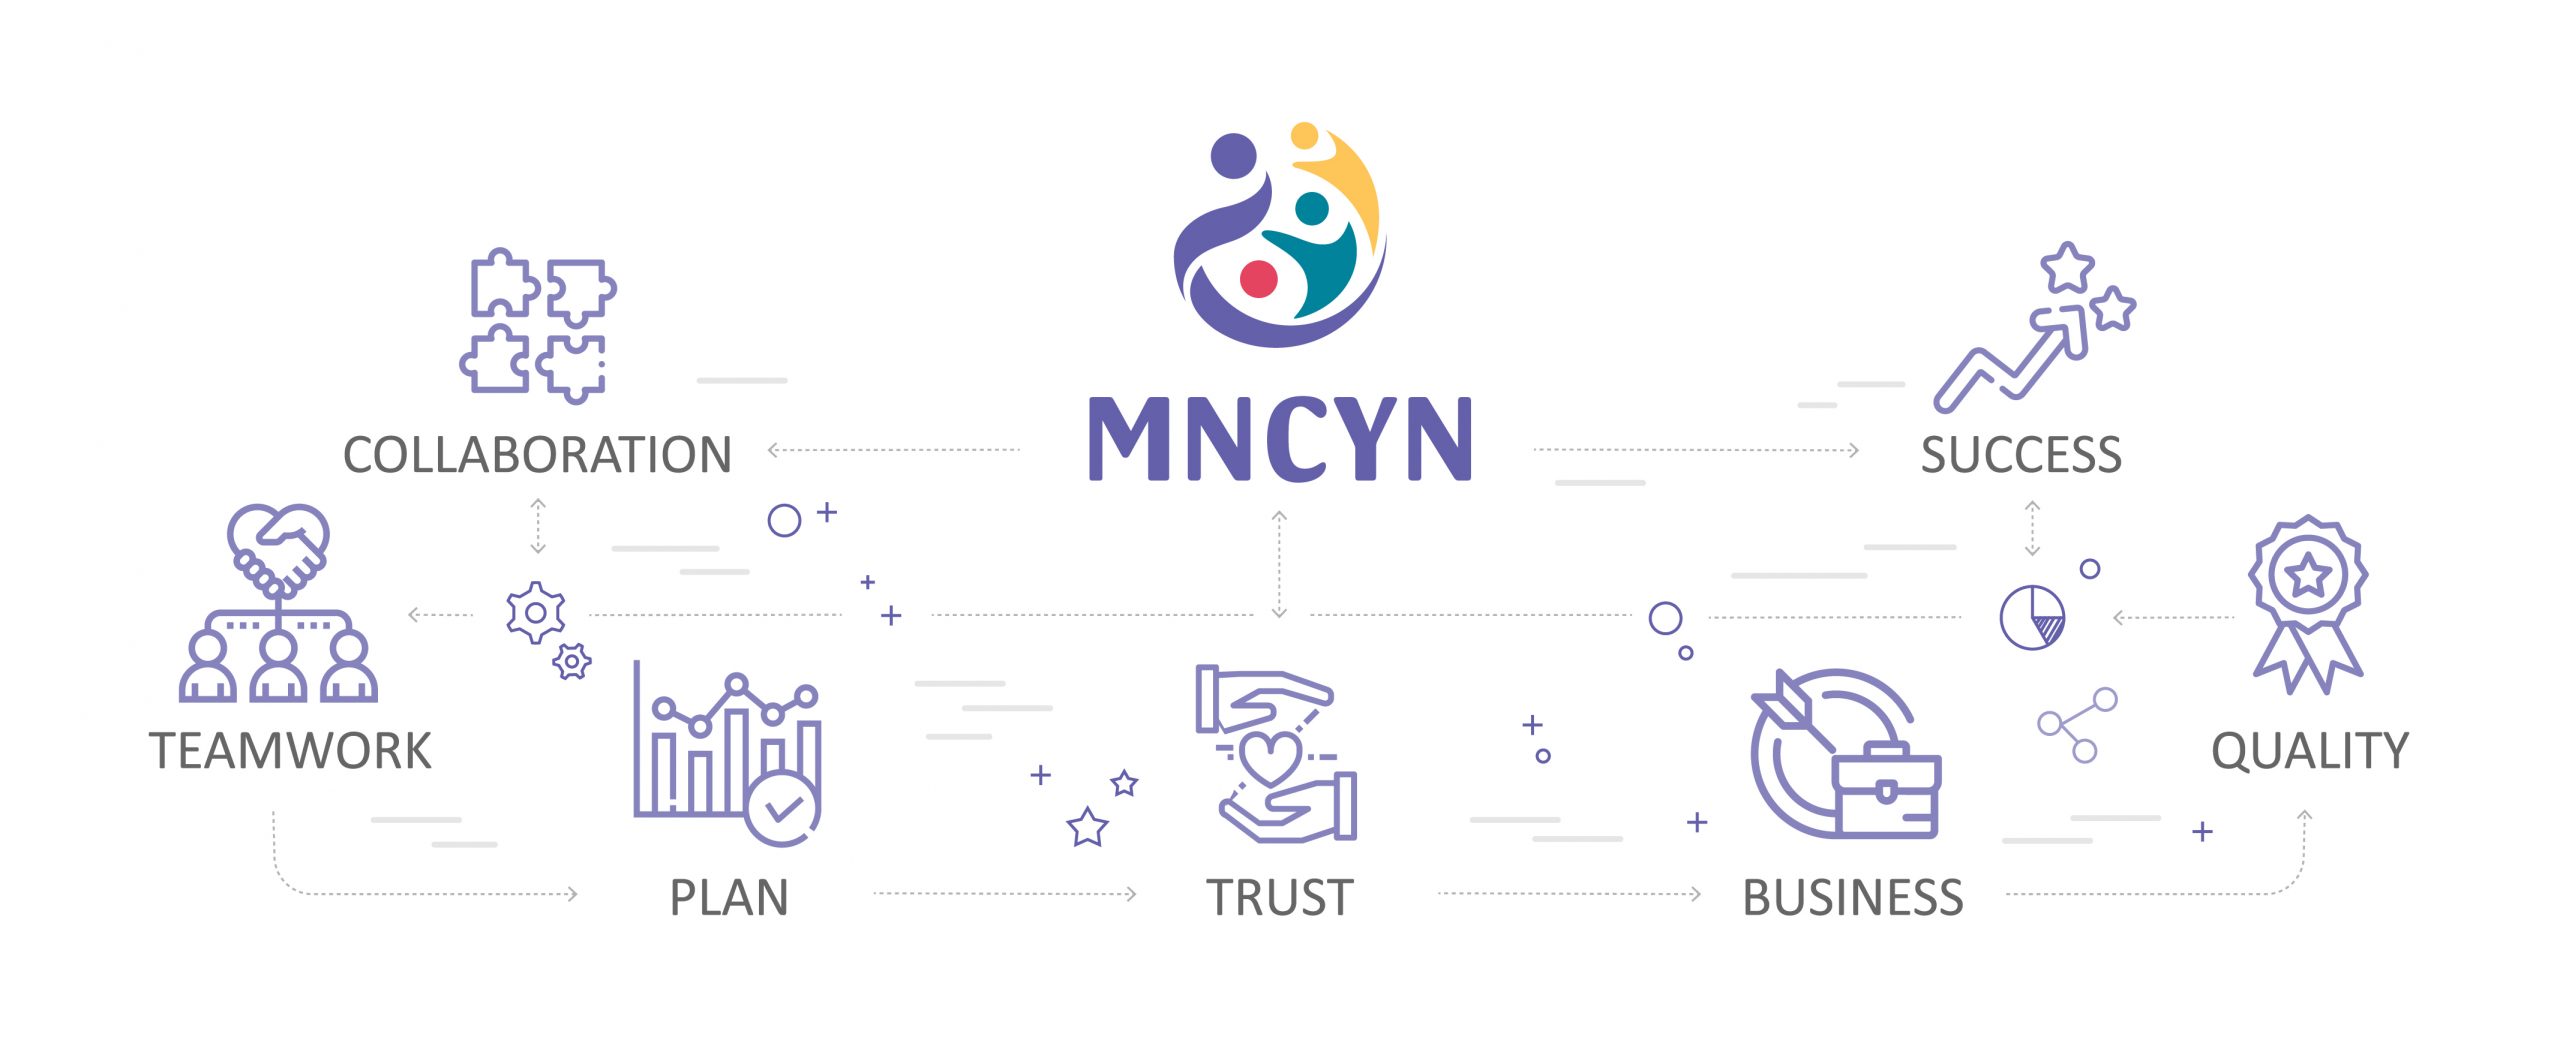 Diagram of MNCYN network emphasizing collaboration, teamwork, planning, success, trust, quality and administration.